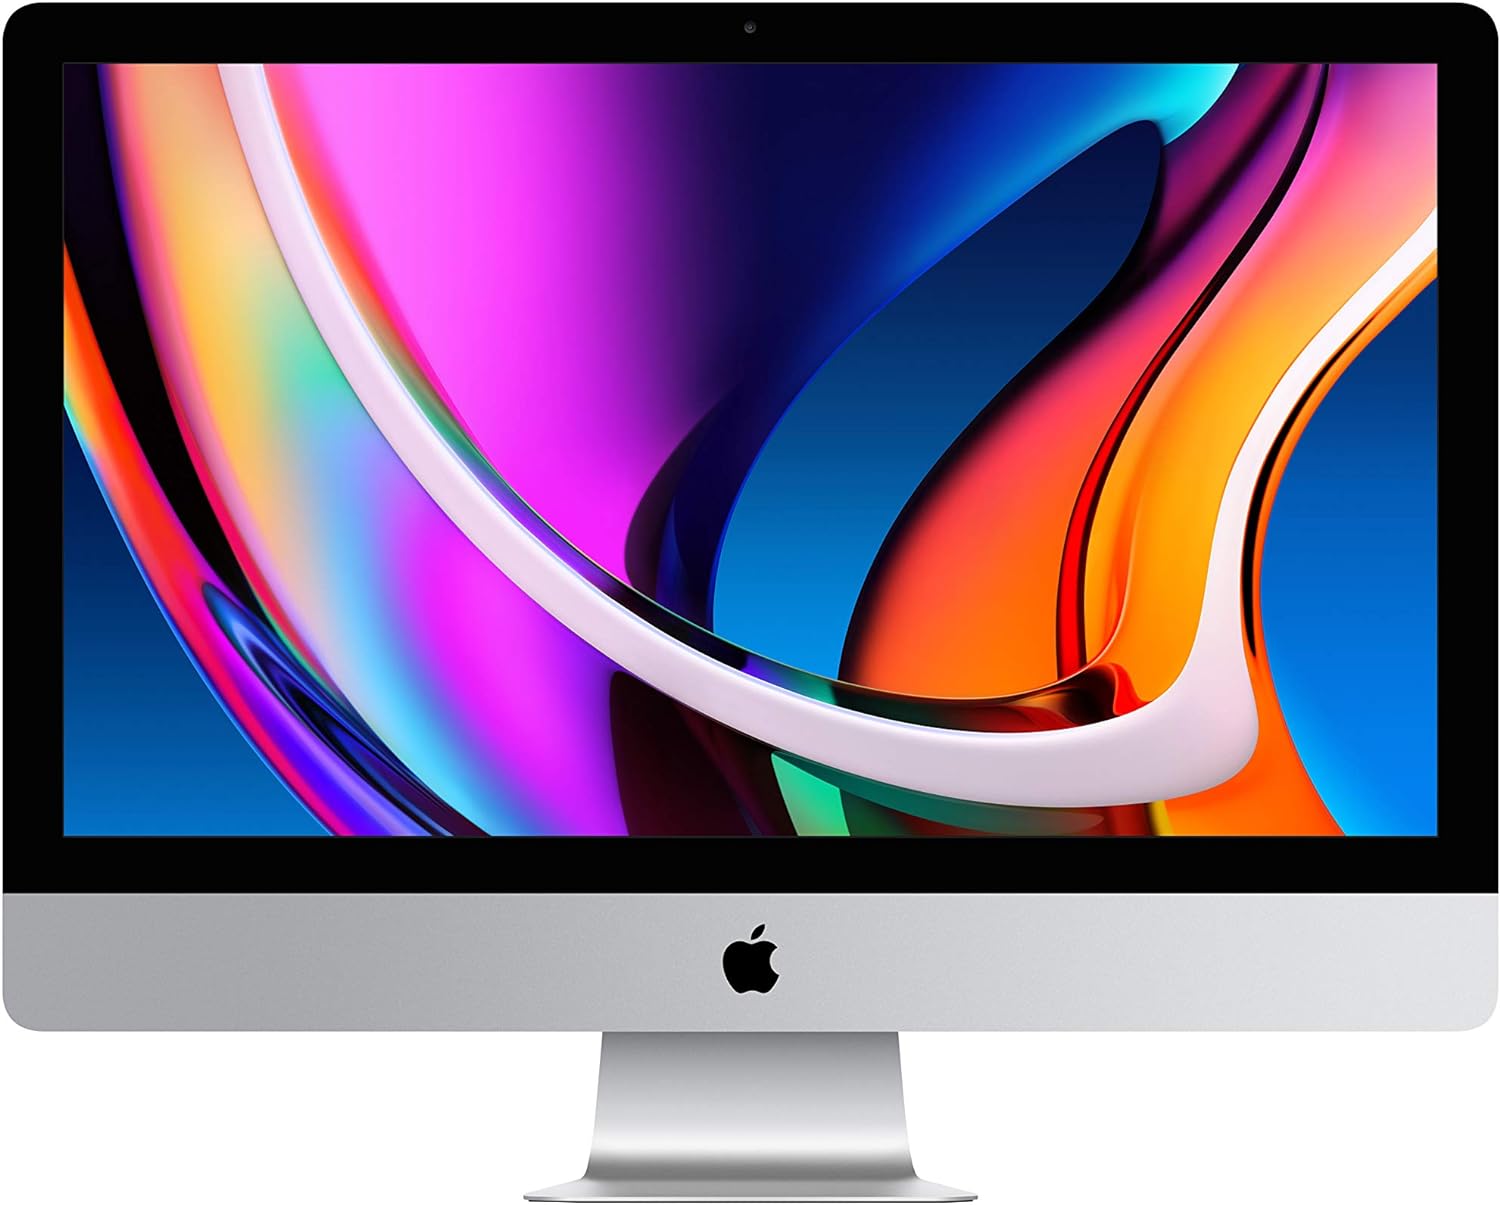 Sorry, 27-inch iMac lovers, but Apple isn’t going to release a 27-inch iMac with Apple silicon chips. We explain why and run down the upgrade options for those who need to move on. | CreativeTechs.com